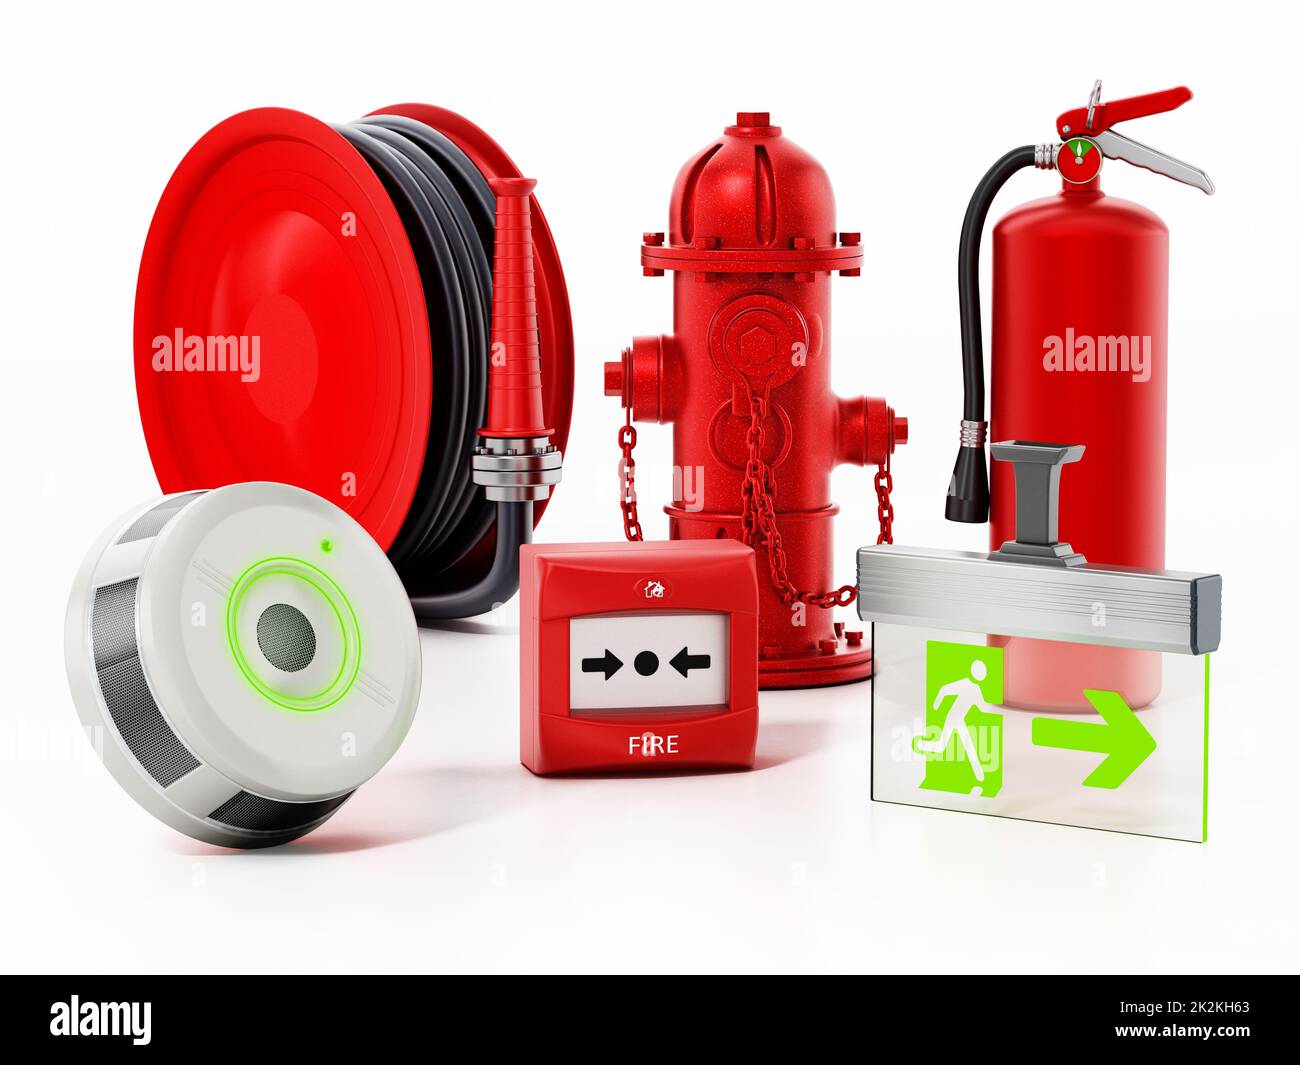 Fire safety equipment isolated on white background. 3D illustration Stock Photo